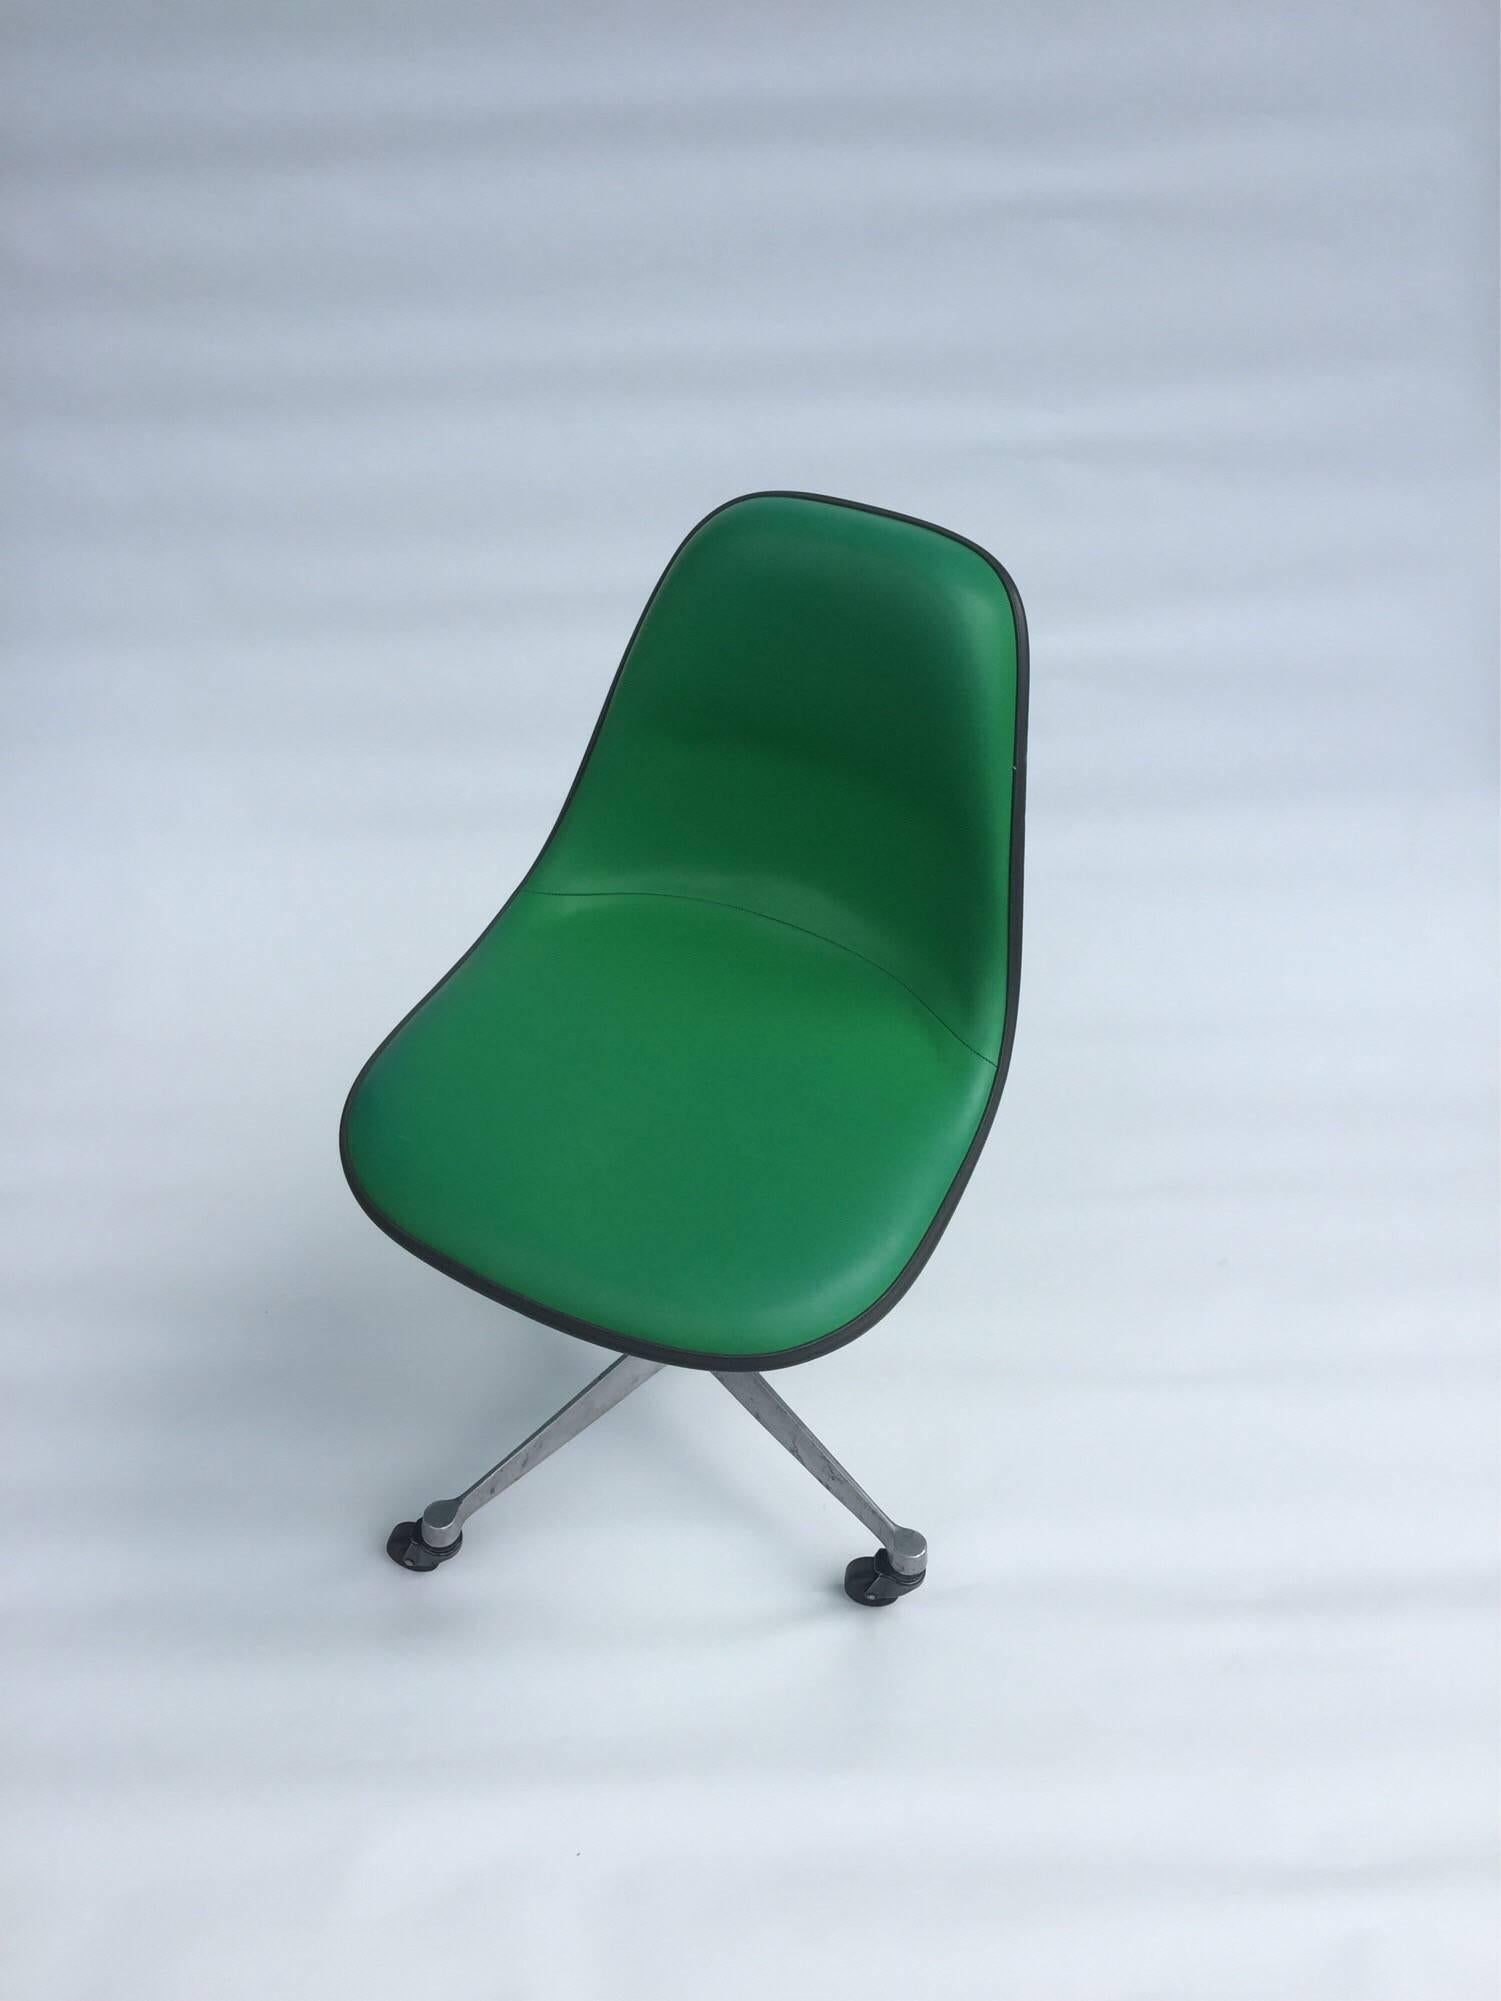 Kelly green fiberglass and vinyl Eames shell chair with rare back padded support on four point rolling office base. similar to the PSCC chair. Chair is in good condition and the Kelly green color is vibrant and bright.